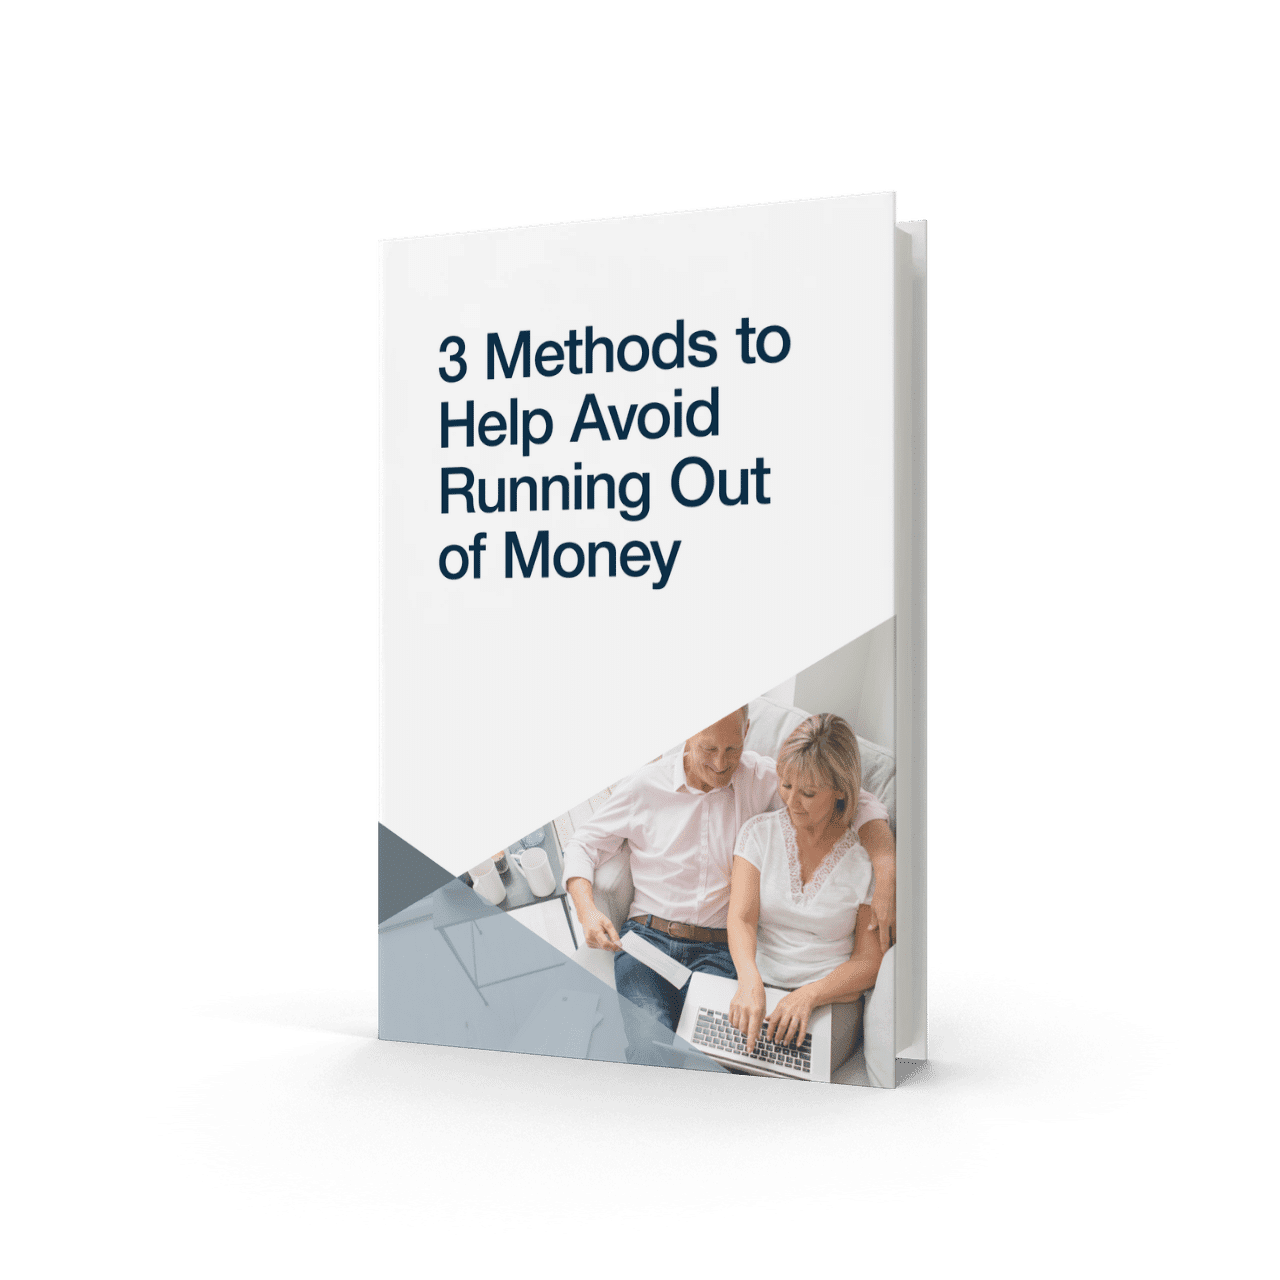 3 Methods to Help Avoid Running Out of Money